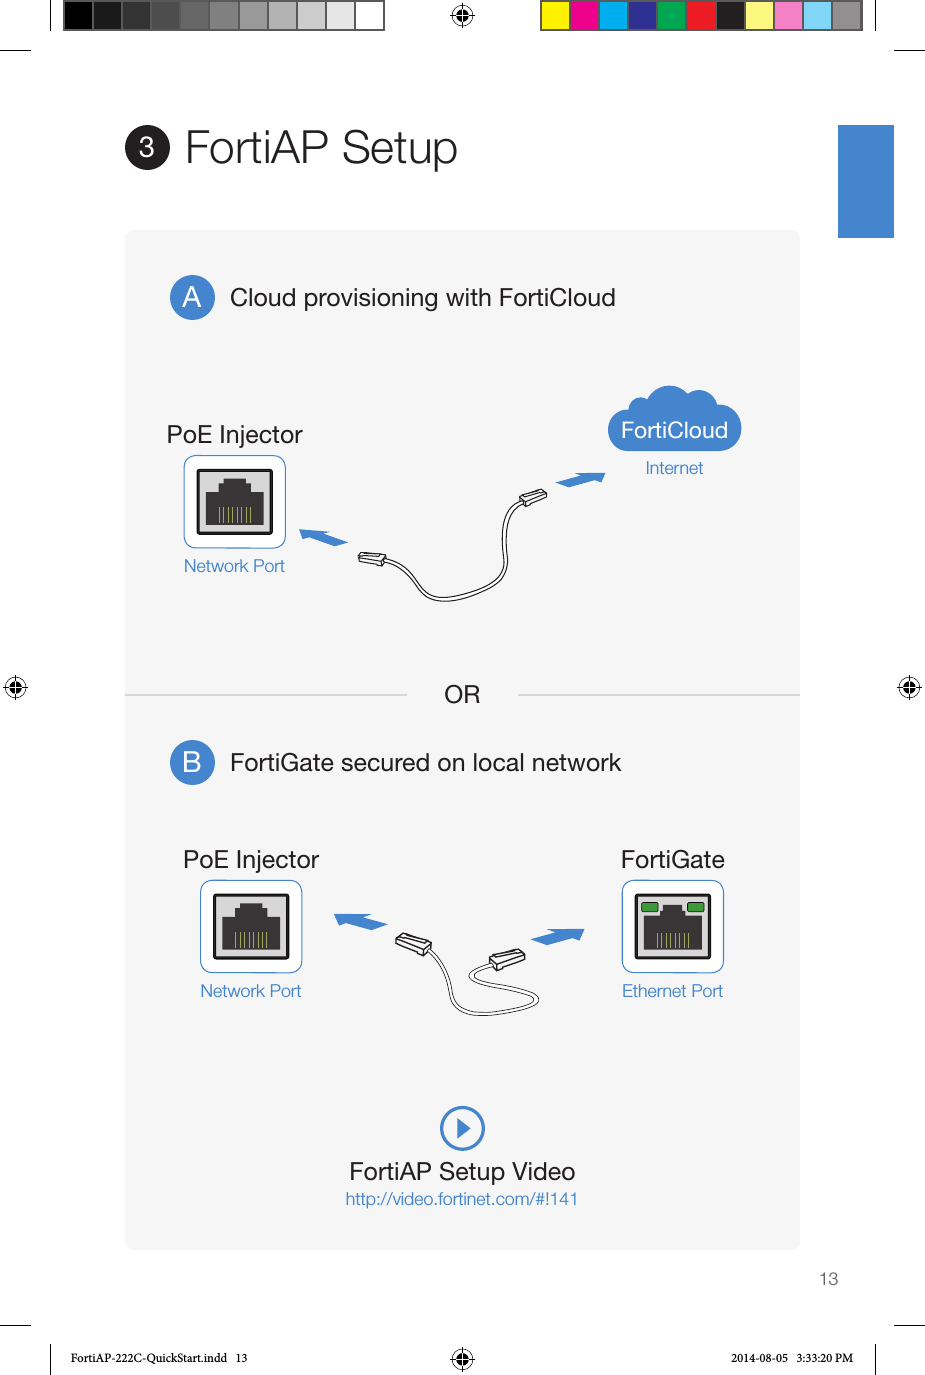 13Cloud provisioning with FortiCloudFortiGate secured on local networkORFortiAP Setup Videohttp://video.fortinet.com/#!141FortiAP Setup3ABFortiCloudInternetPoE InjectorNetwork Port Ethernet PortPoE Injector FortiGateNetwork PortFortiAP-222C-QuickStart.indd   13 2014-08-05   3:33:20 PM